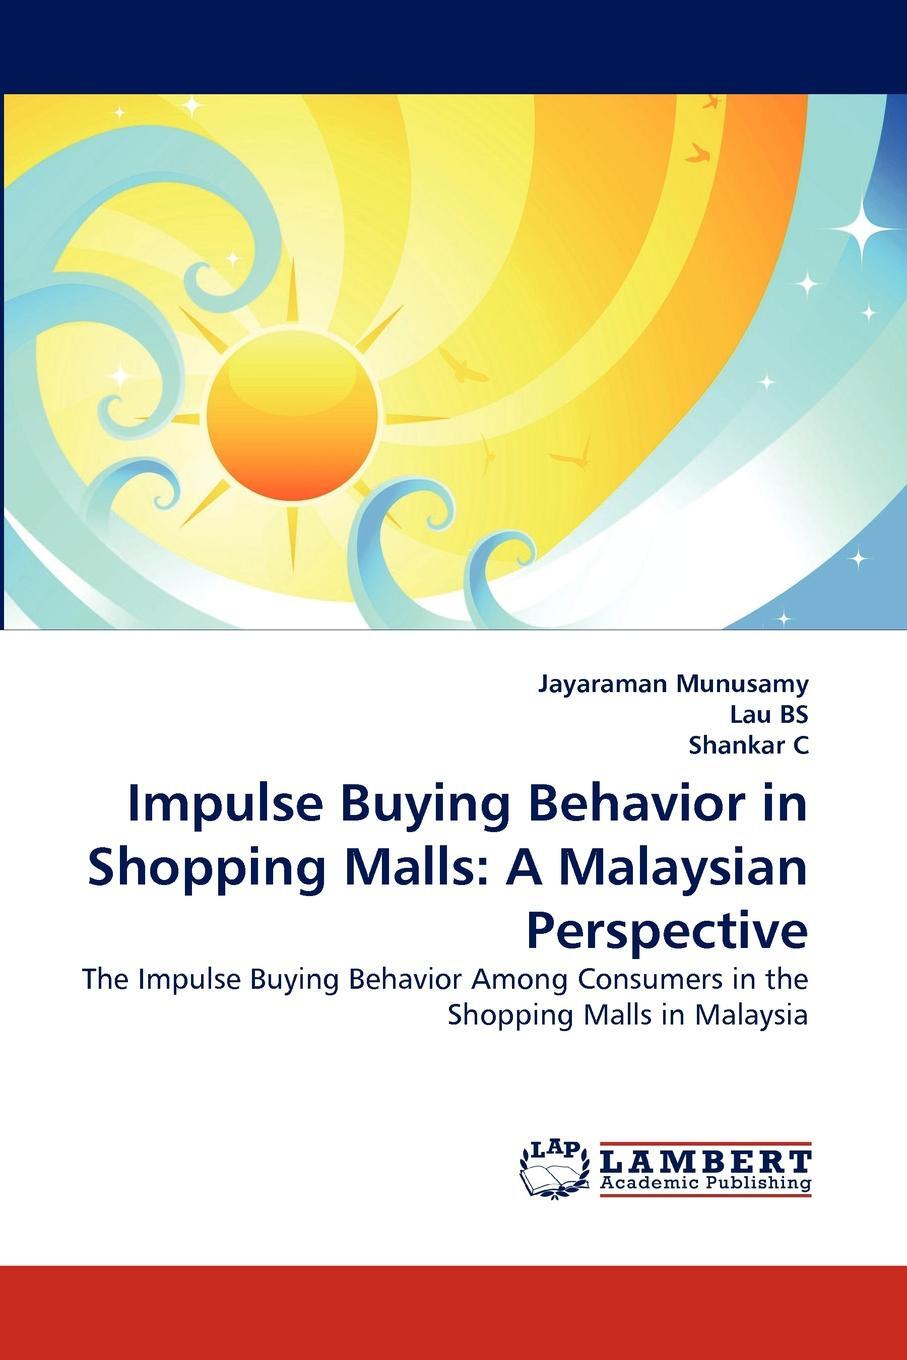 фото Impulse Buying Behavior in Shopping Malls. A Malaysian Perspective